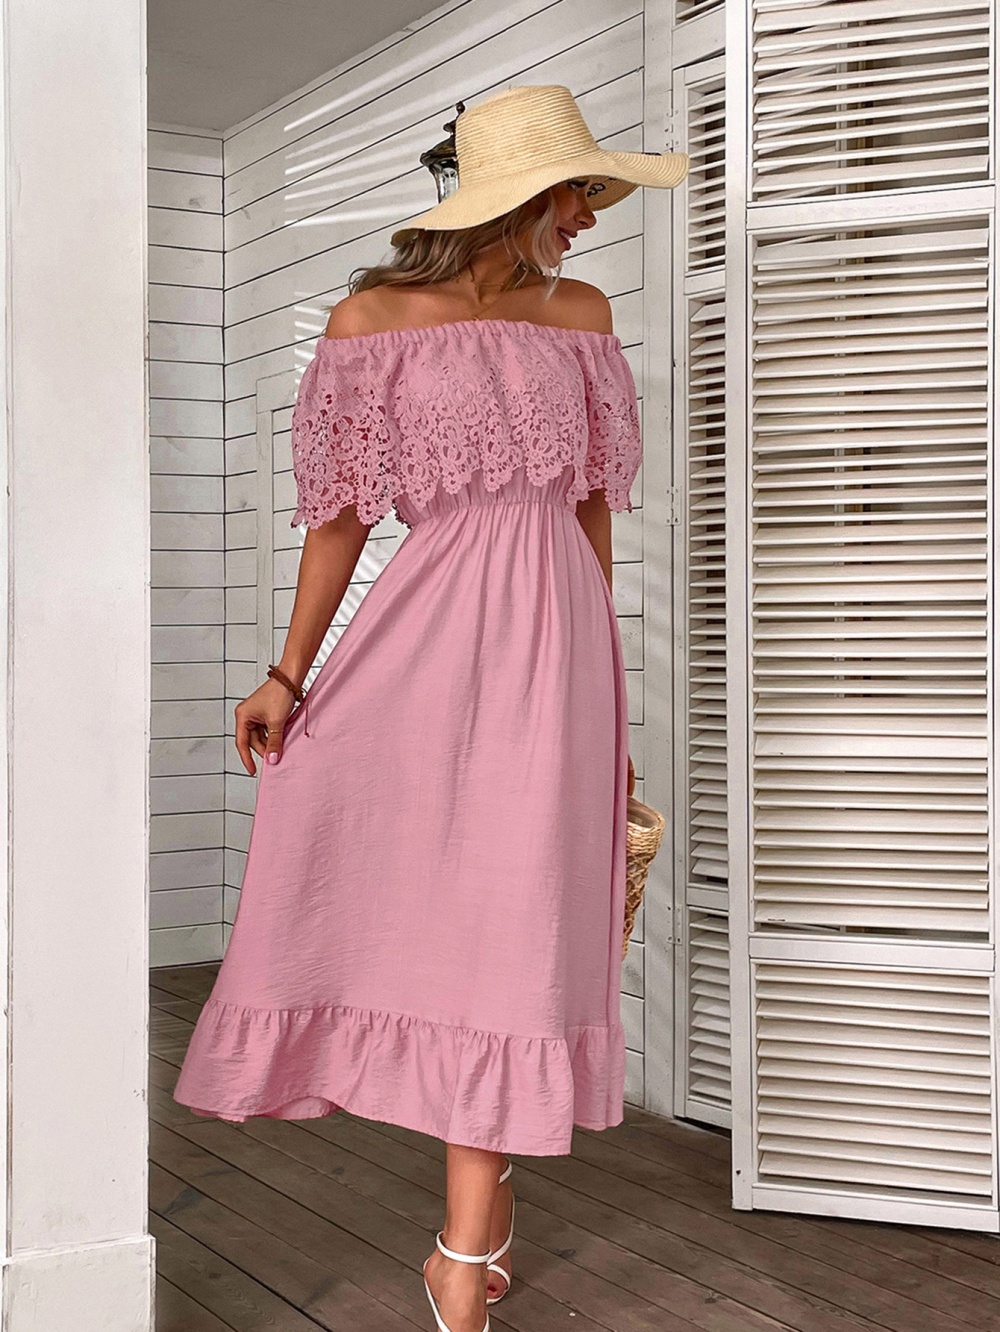 Spring and summer lace commuting splice temperament dress